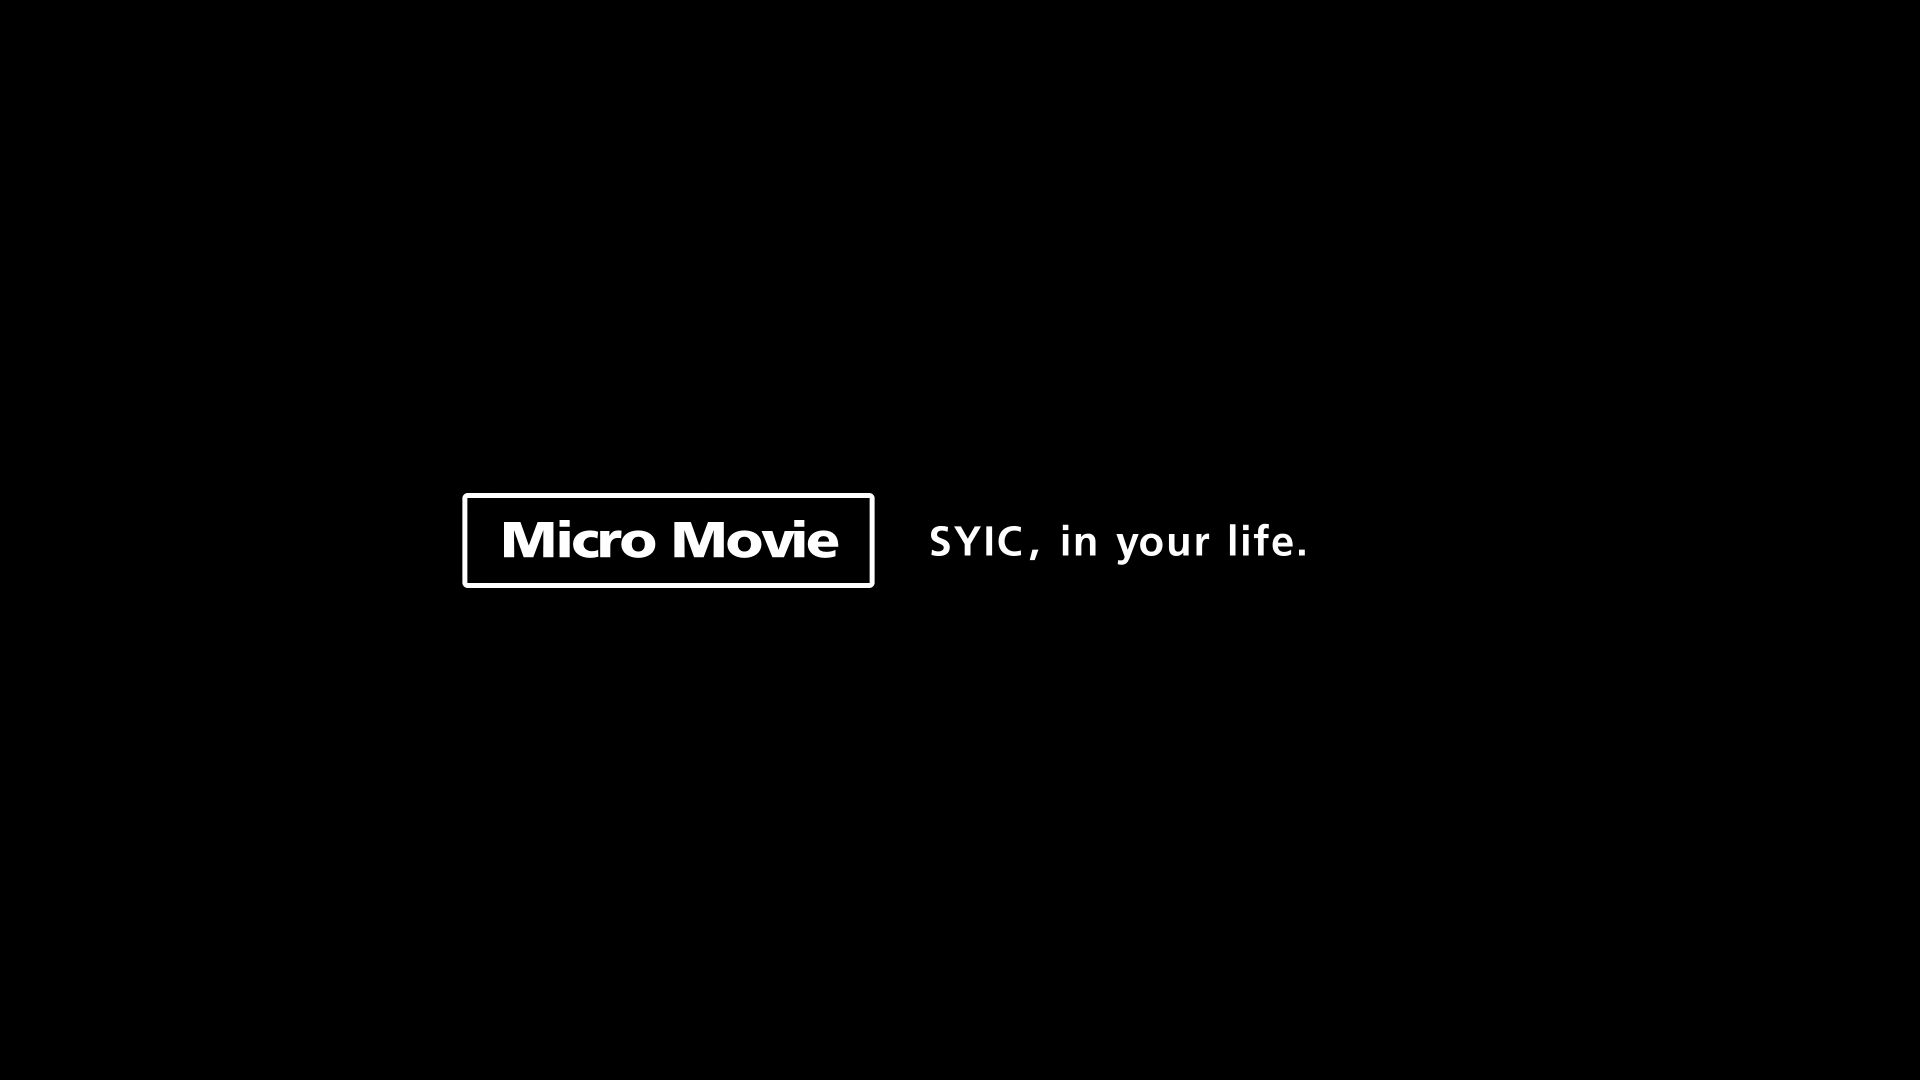 SYIC, in your life (micro movie)